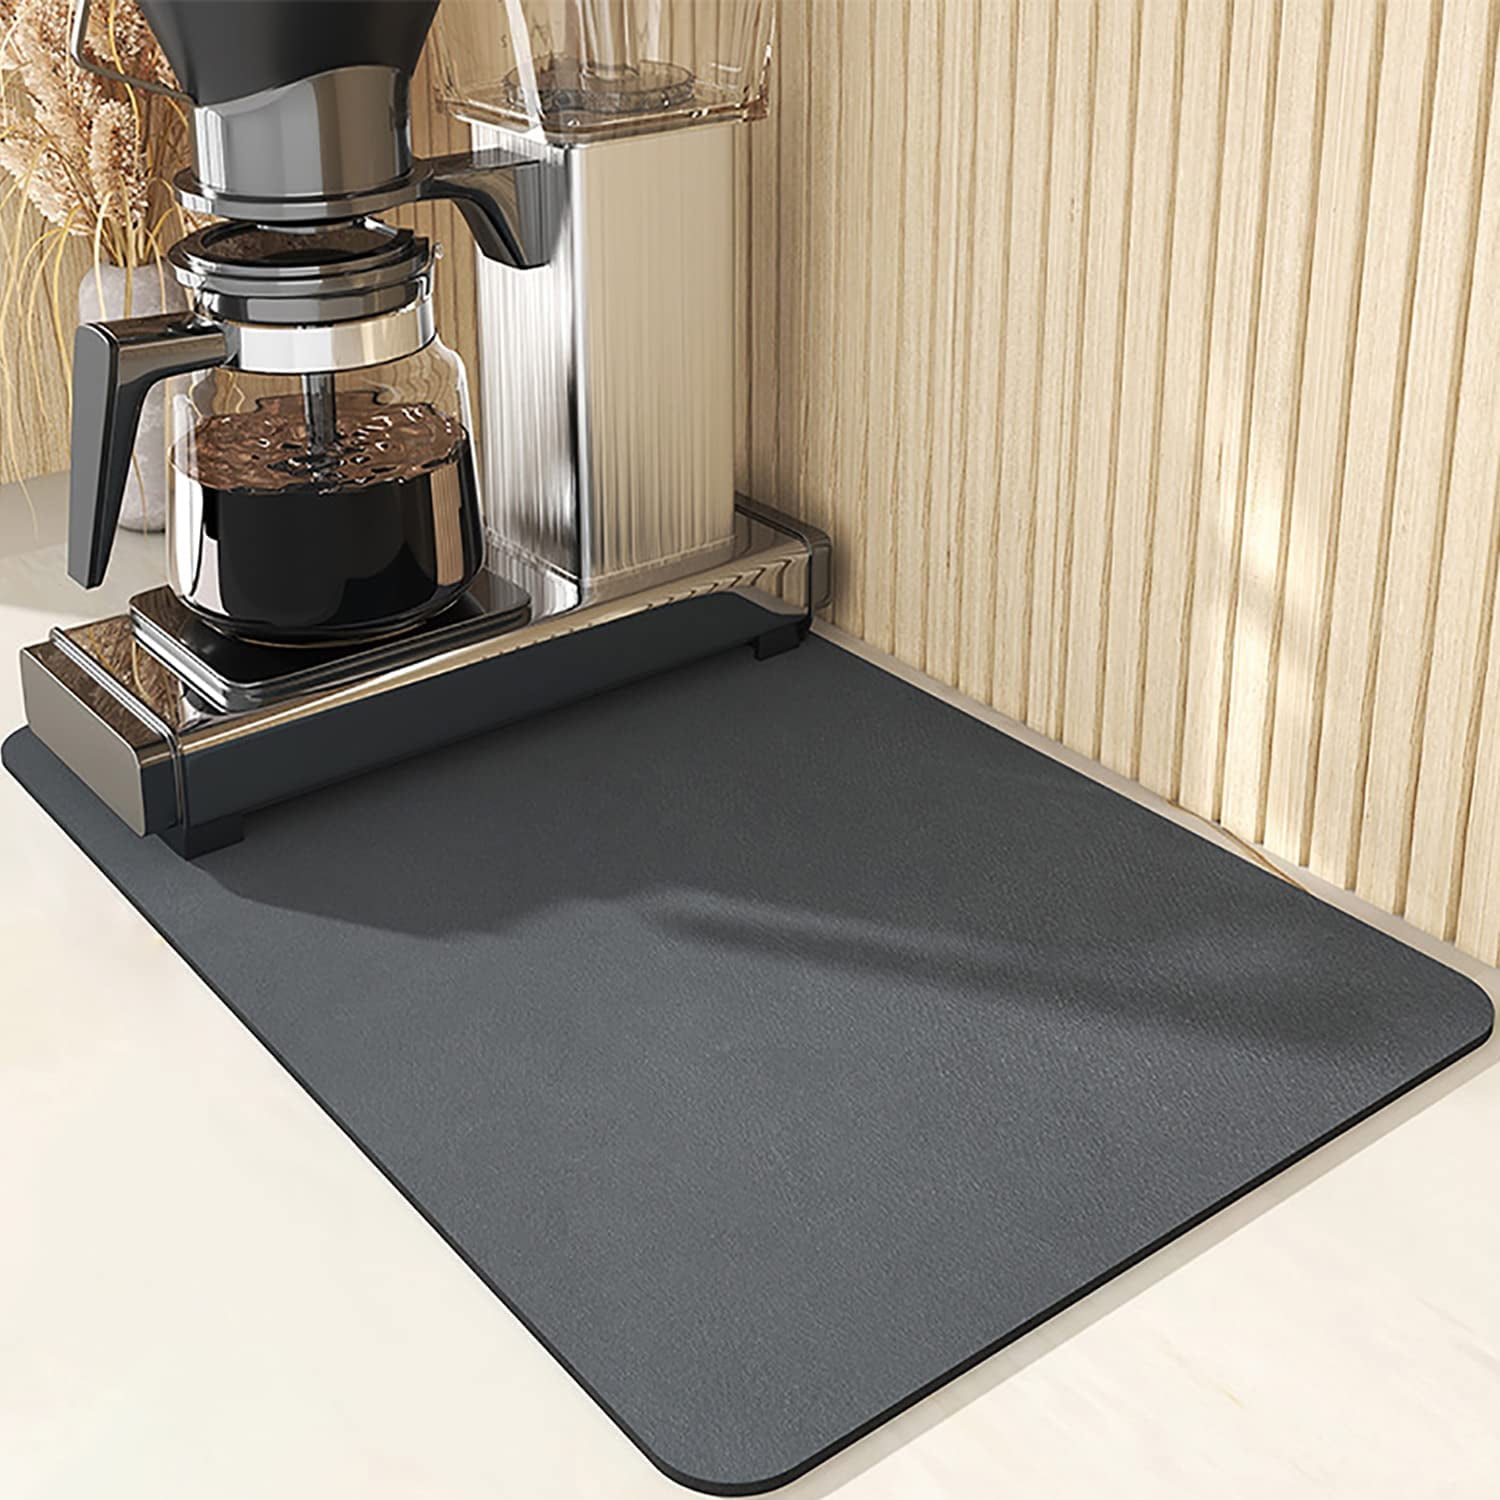  Coffee Bar Mat For Spill-proof, 24 X 16 Inch Hide Stain  Abosrbent MatNon-Slip Rubber Backed Coffee Bar Accessories Under The Cofee  Machines